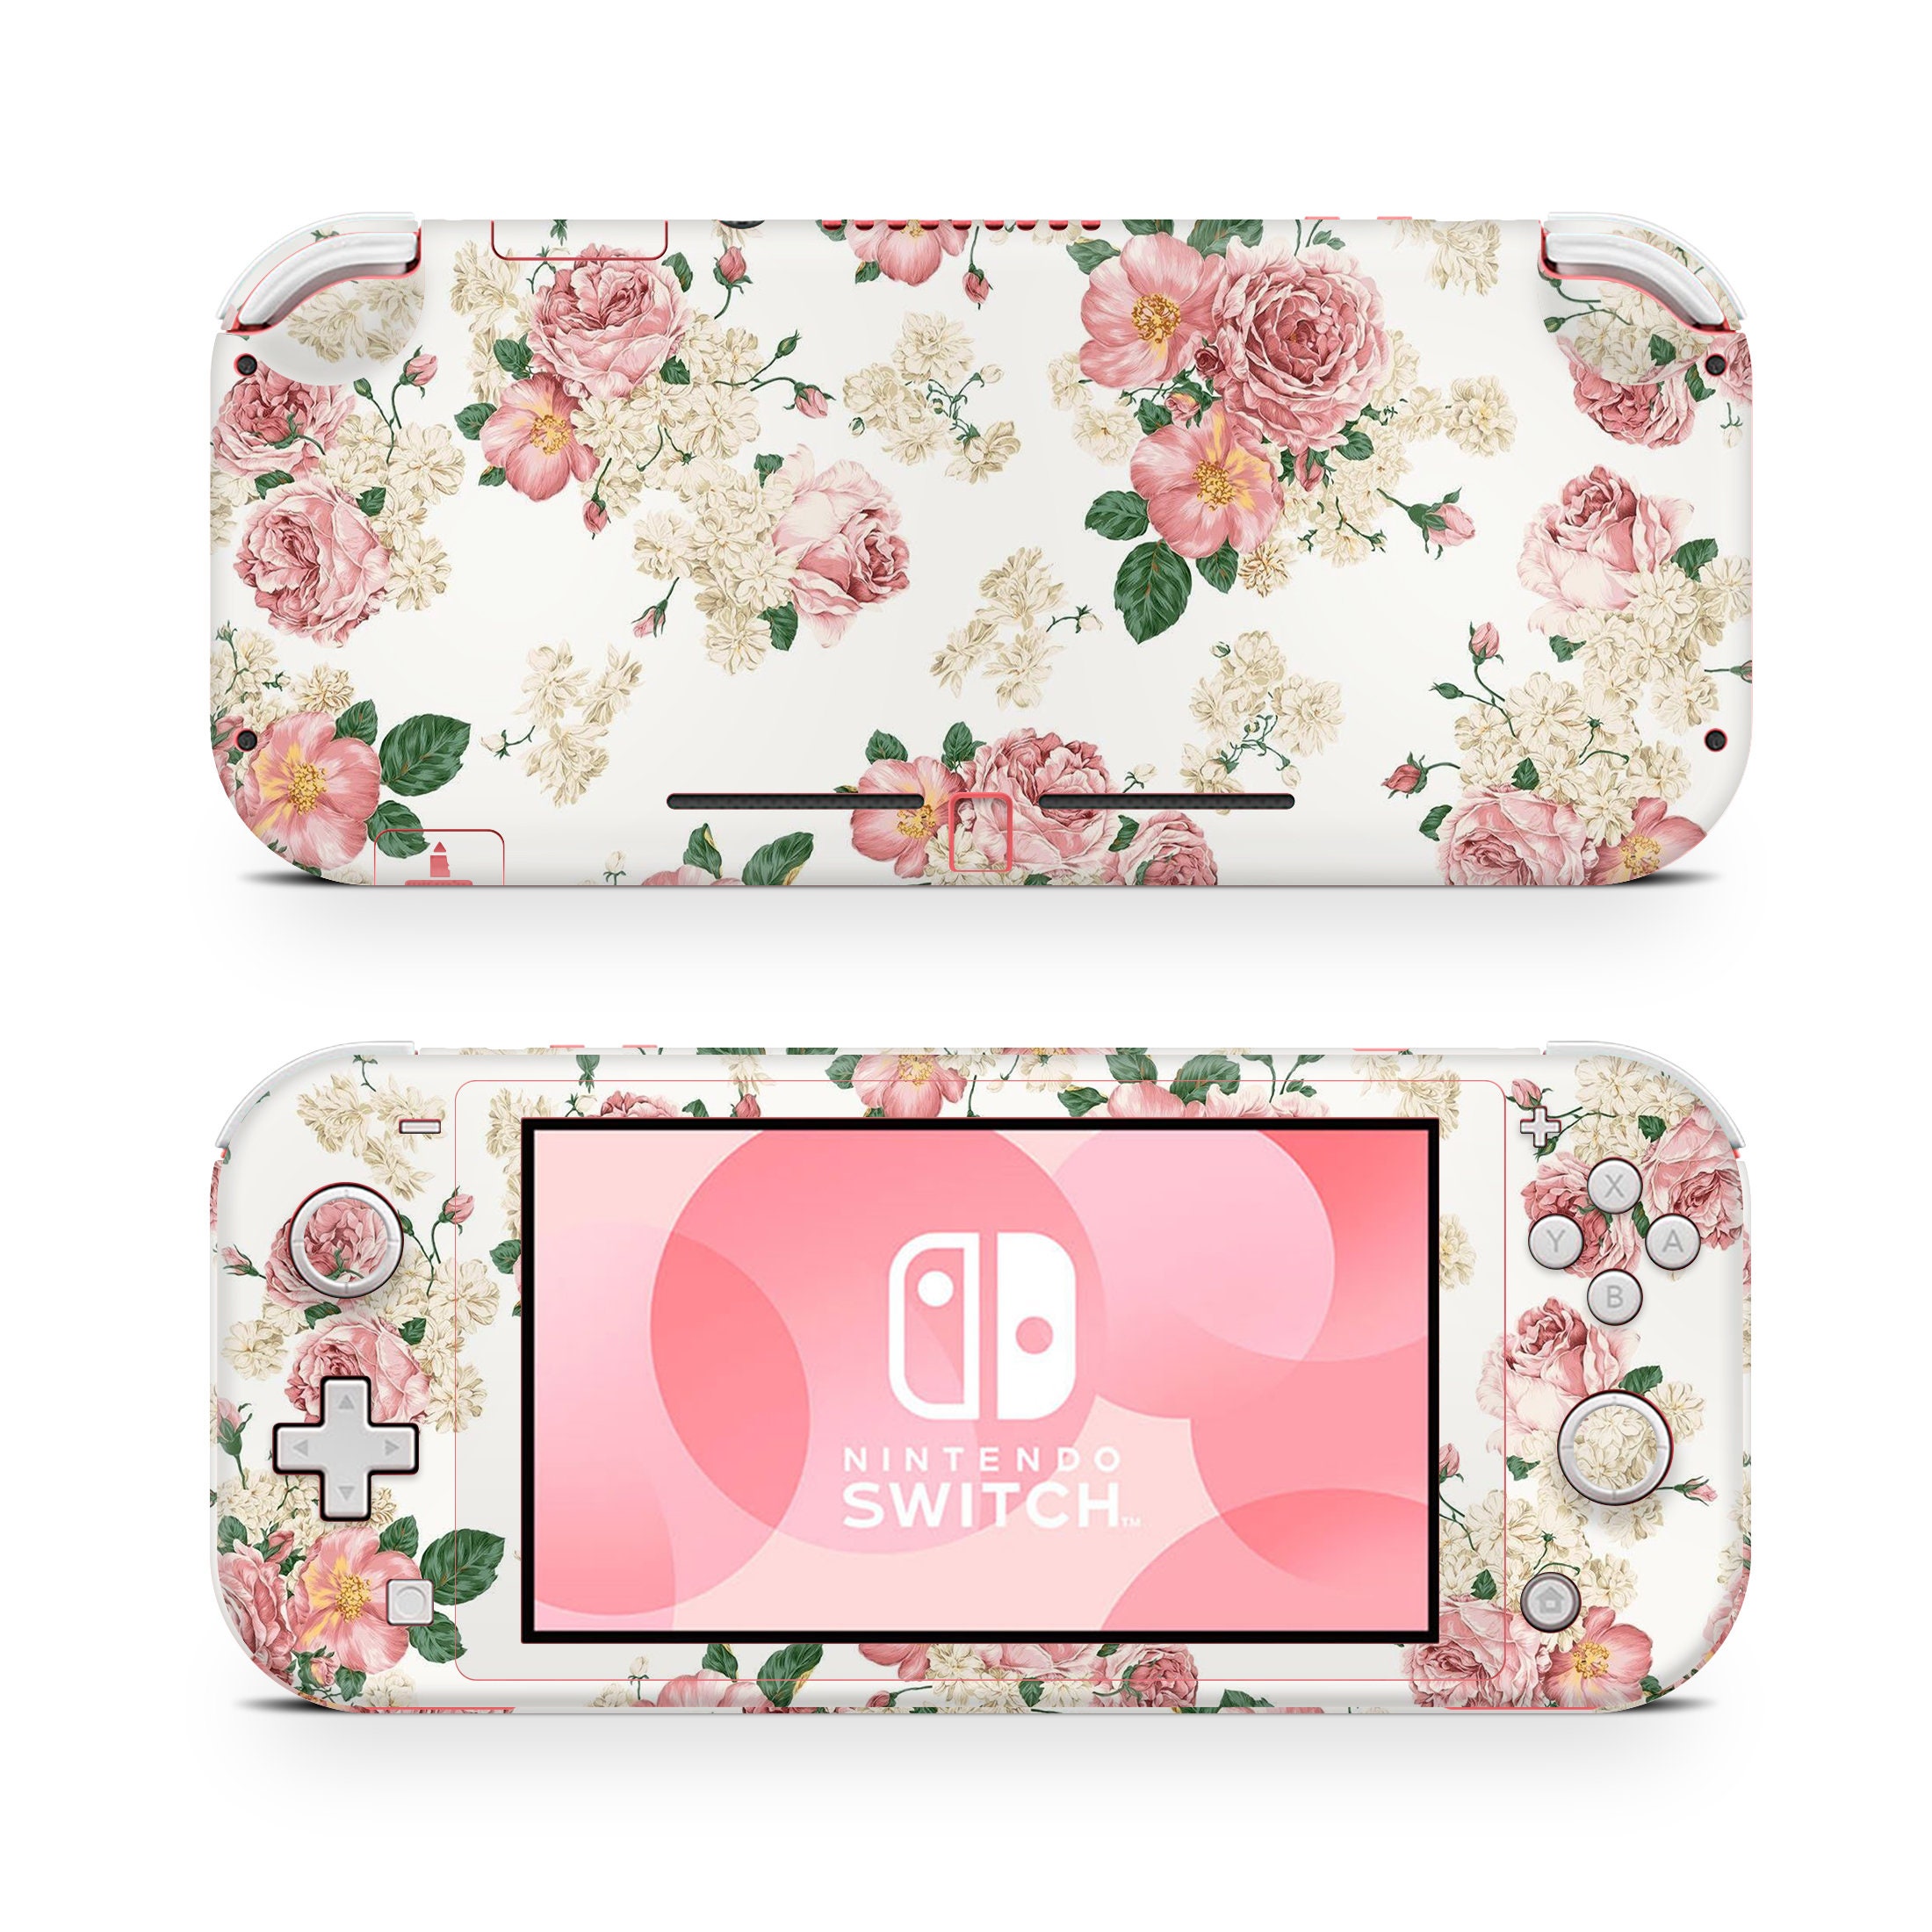 Buy Nintendo Switch Lite Skin Decal for Game Console Old Vintage Flourish  Online in India 